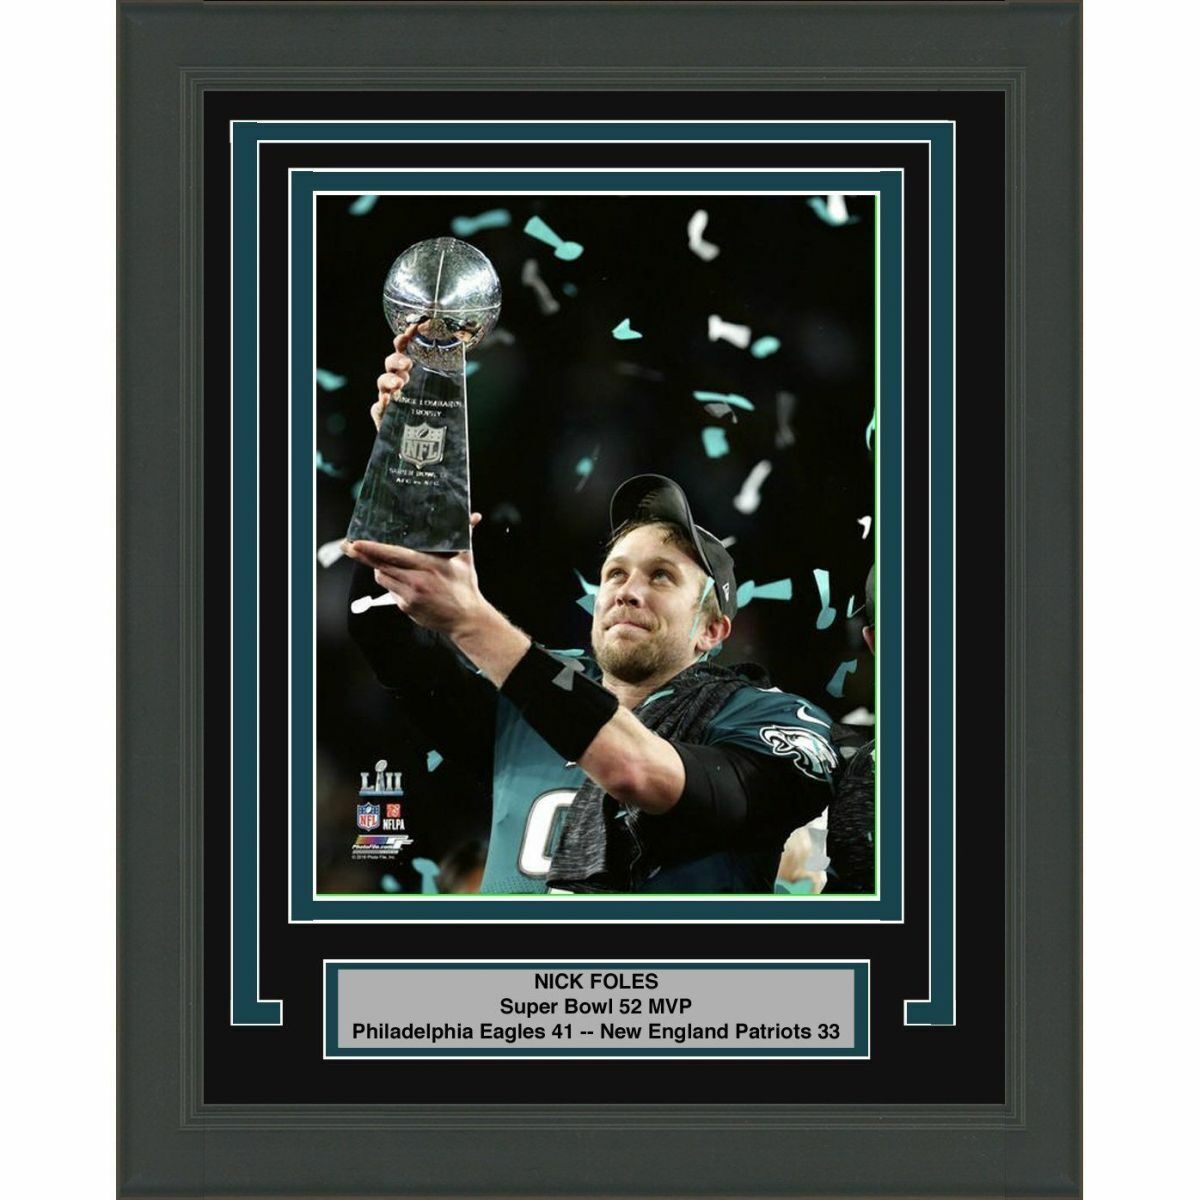 Framed NICK FOLES Eagles Super Bowl 52 MVP 8x10 Photo Poster painting Professionally Matted #1